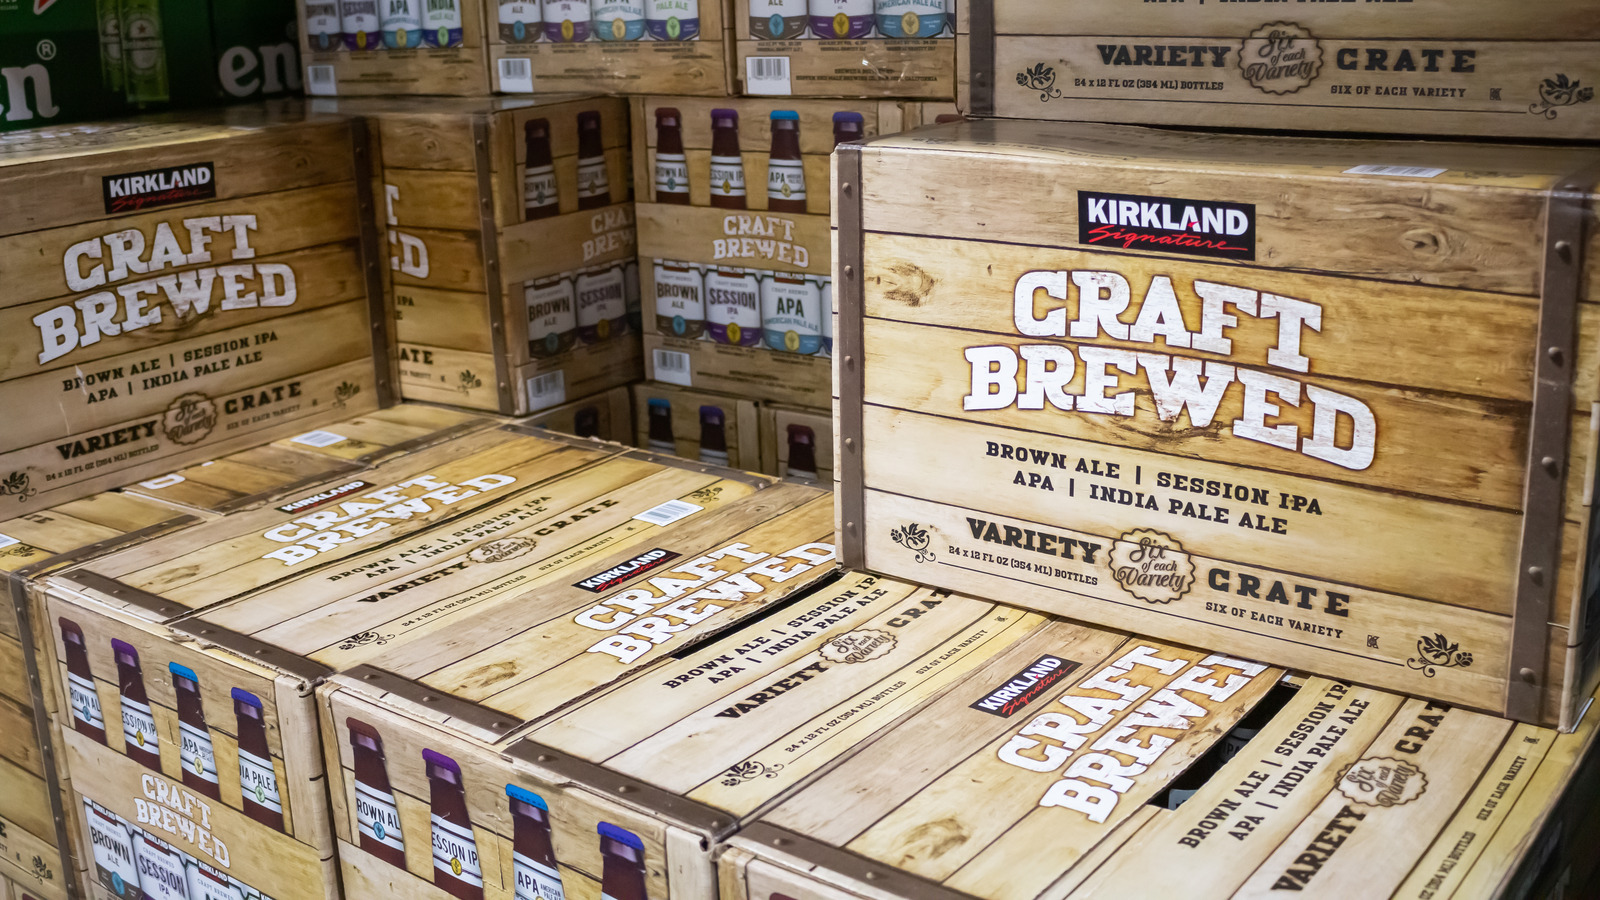 Why You Should Skip Picking Up Craft Beer At Costco - Chowhound